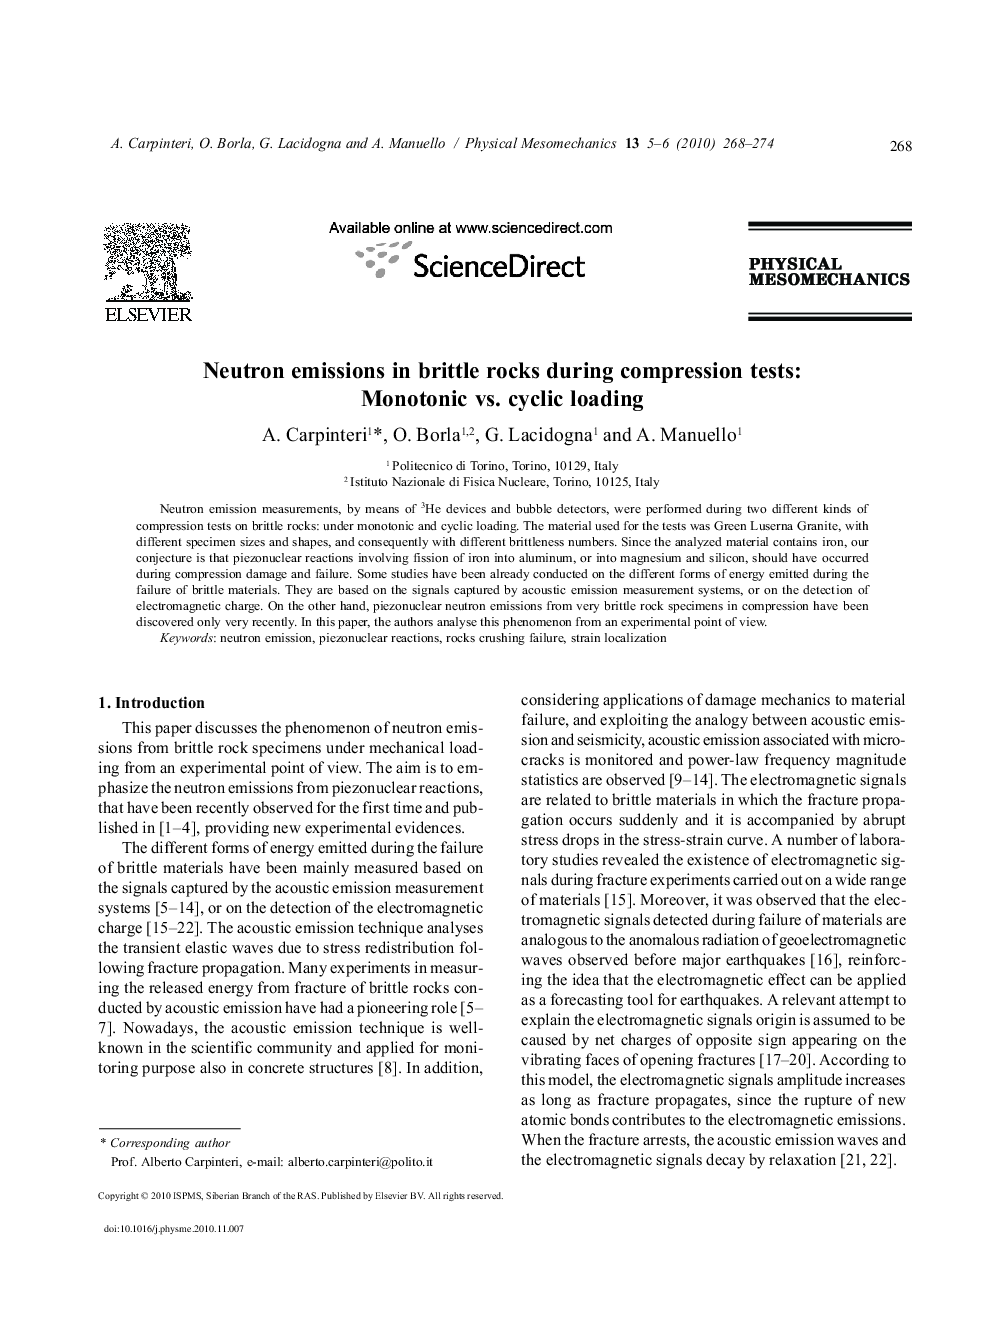 Neutron emissions in brittle rocks during compression tests: Monotonic vs. cyclic loading